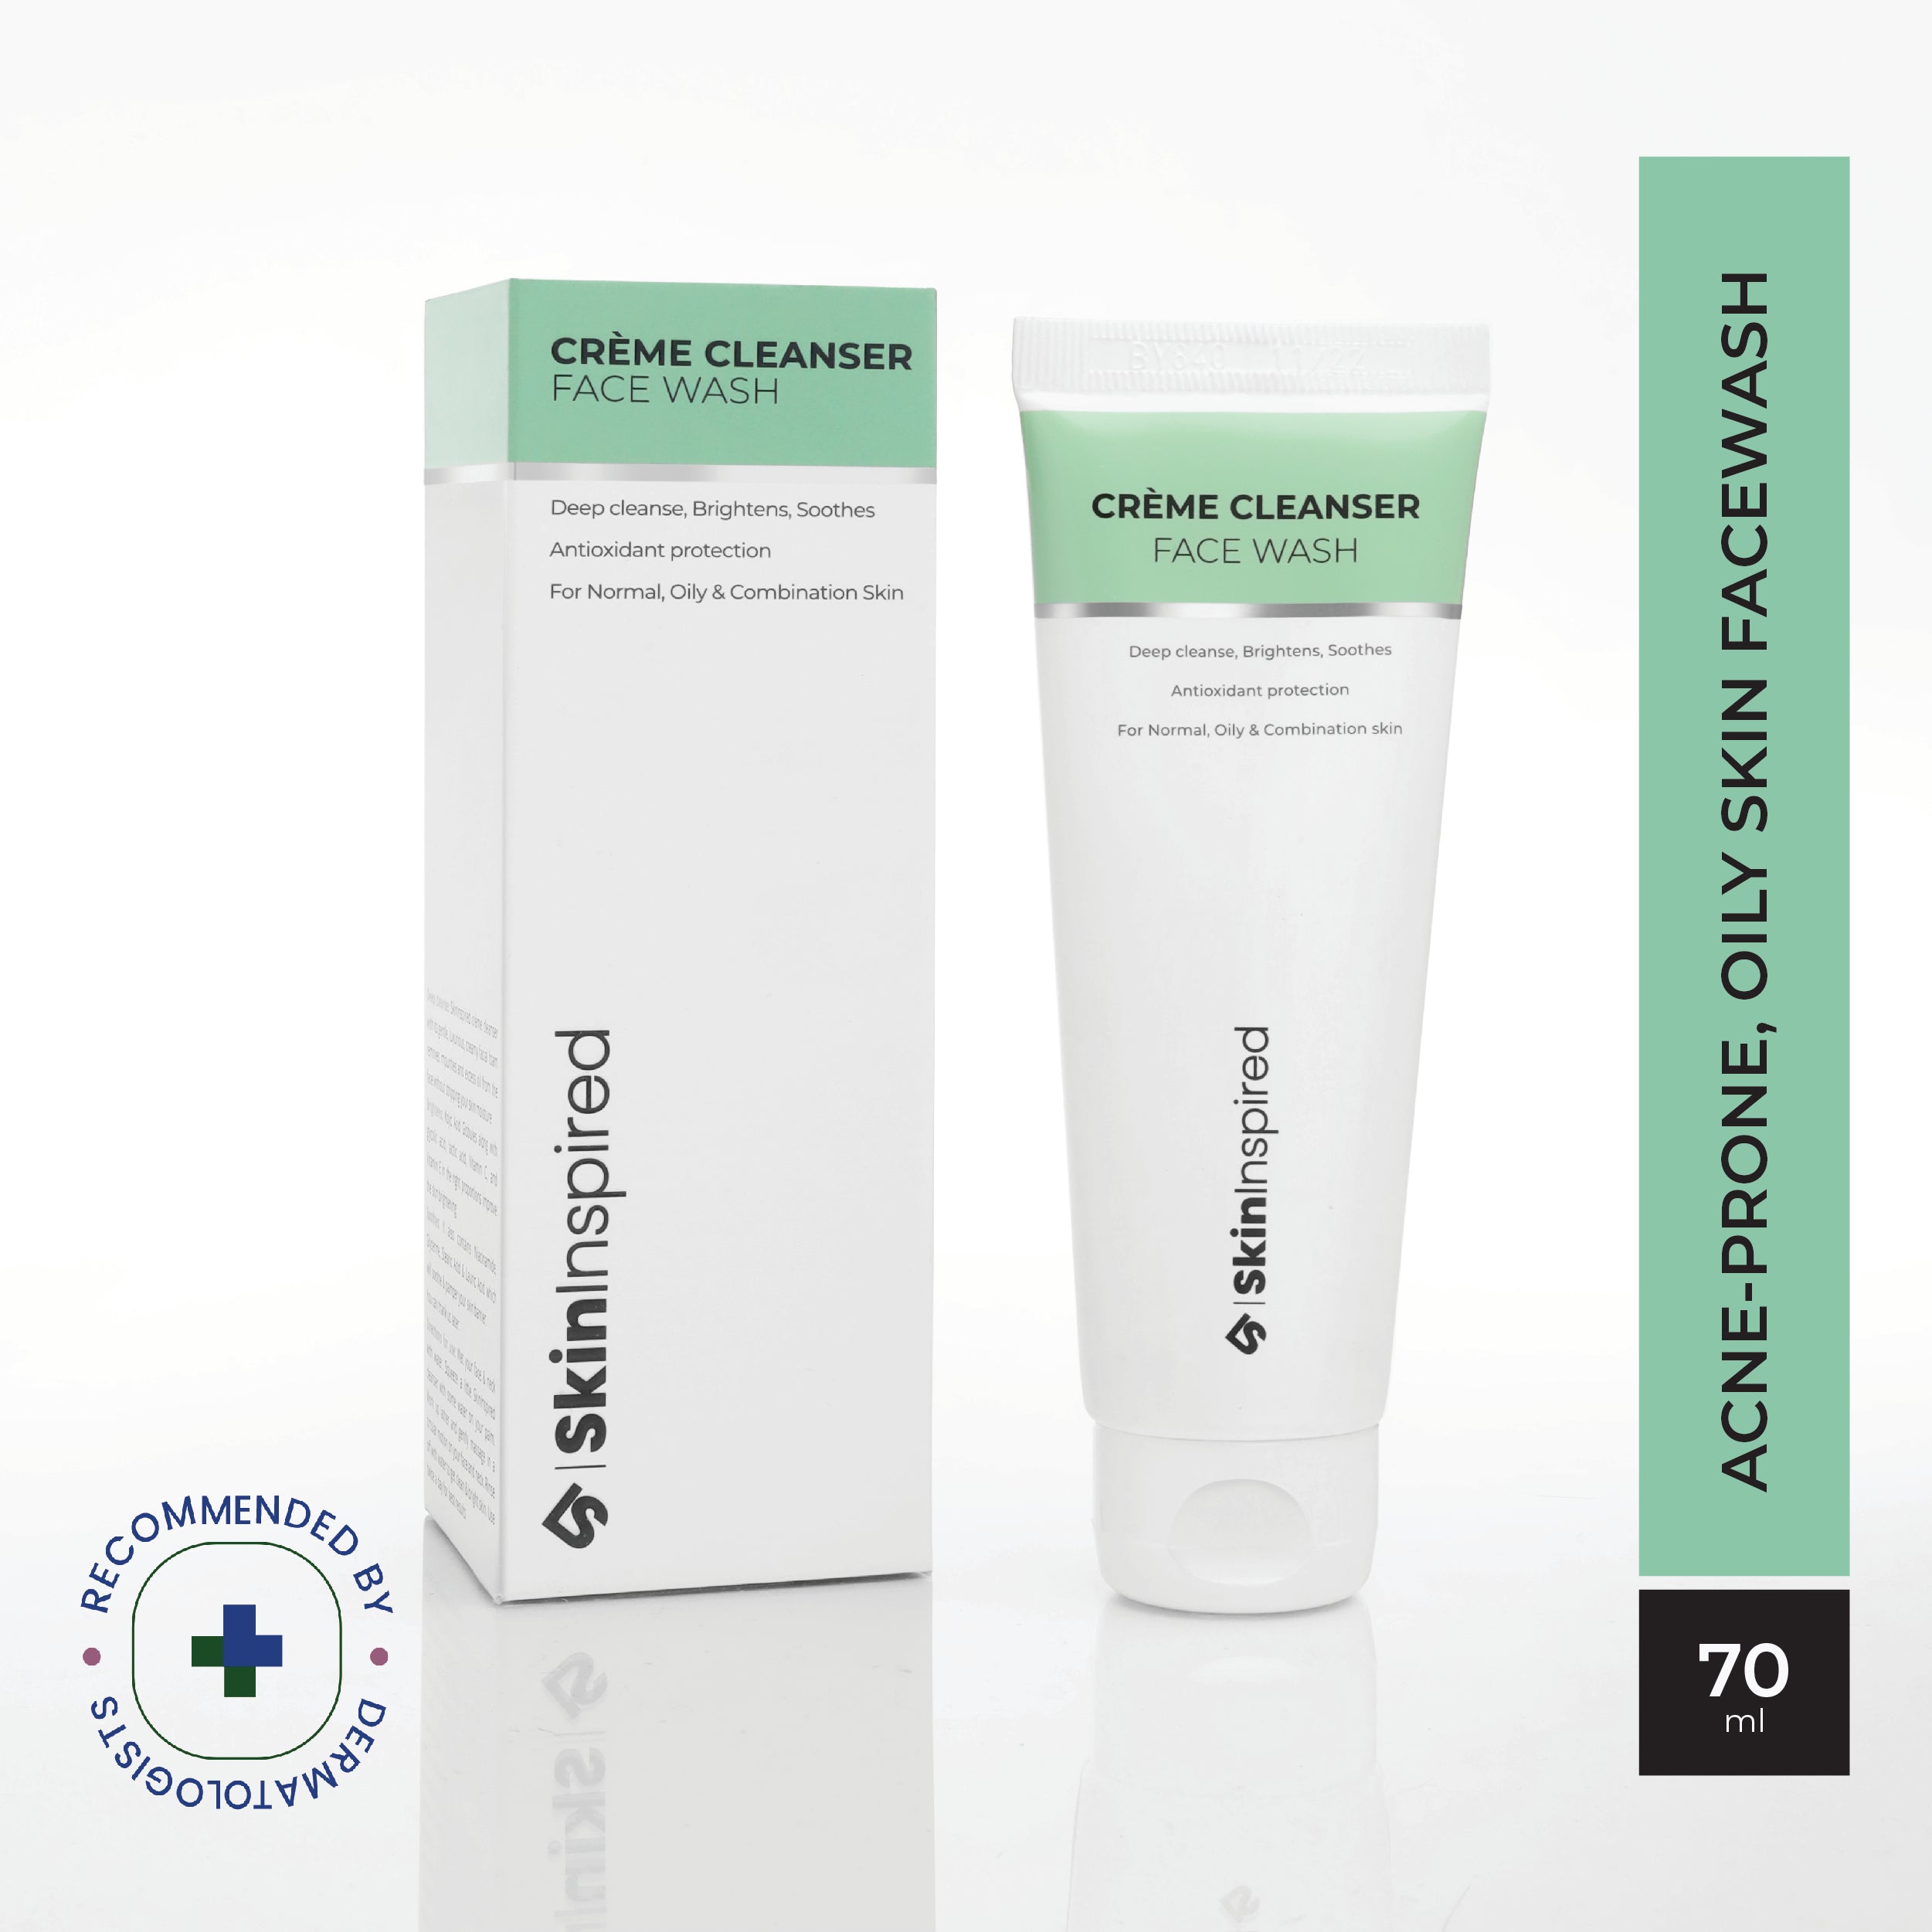 SkinInspired Creme Cleanser Facewash for Deep Cleansing